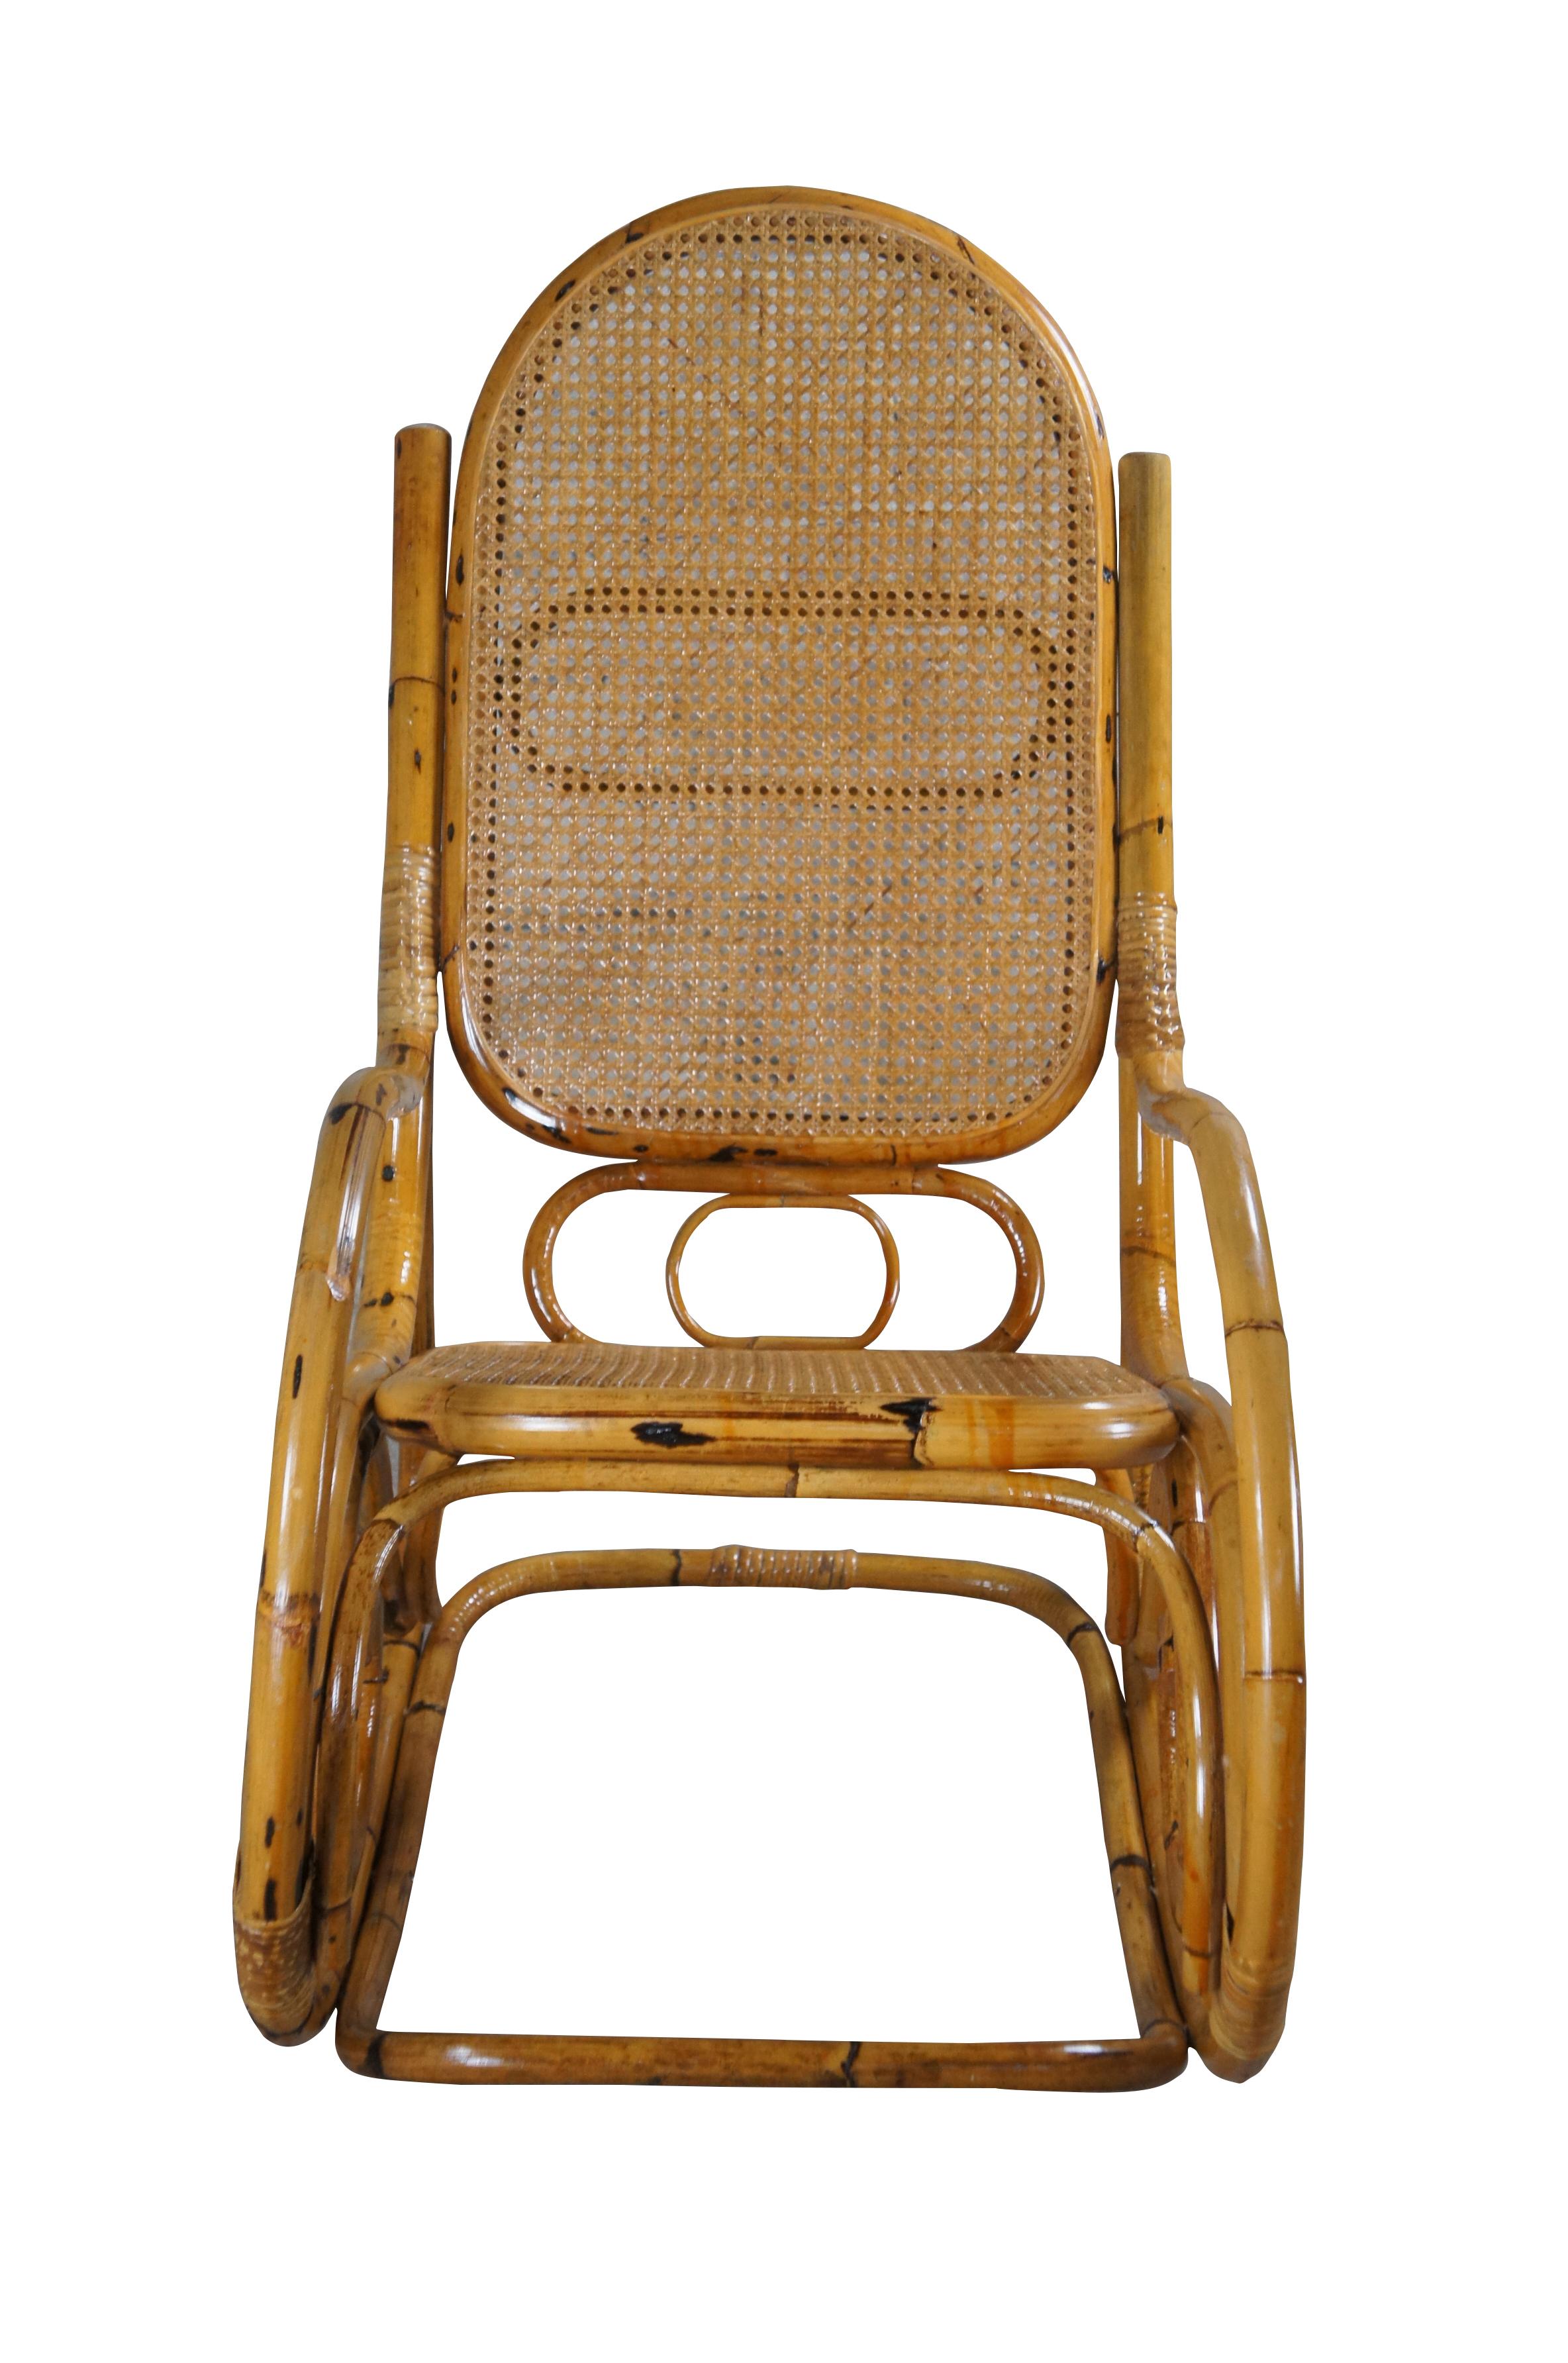 A large Iconic bentwood rocking chair, attributed to Thonet. Made from bamboo in with caned back and seat.

Measures: 22